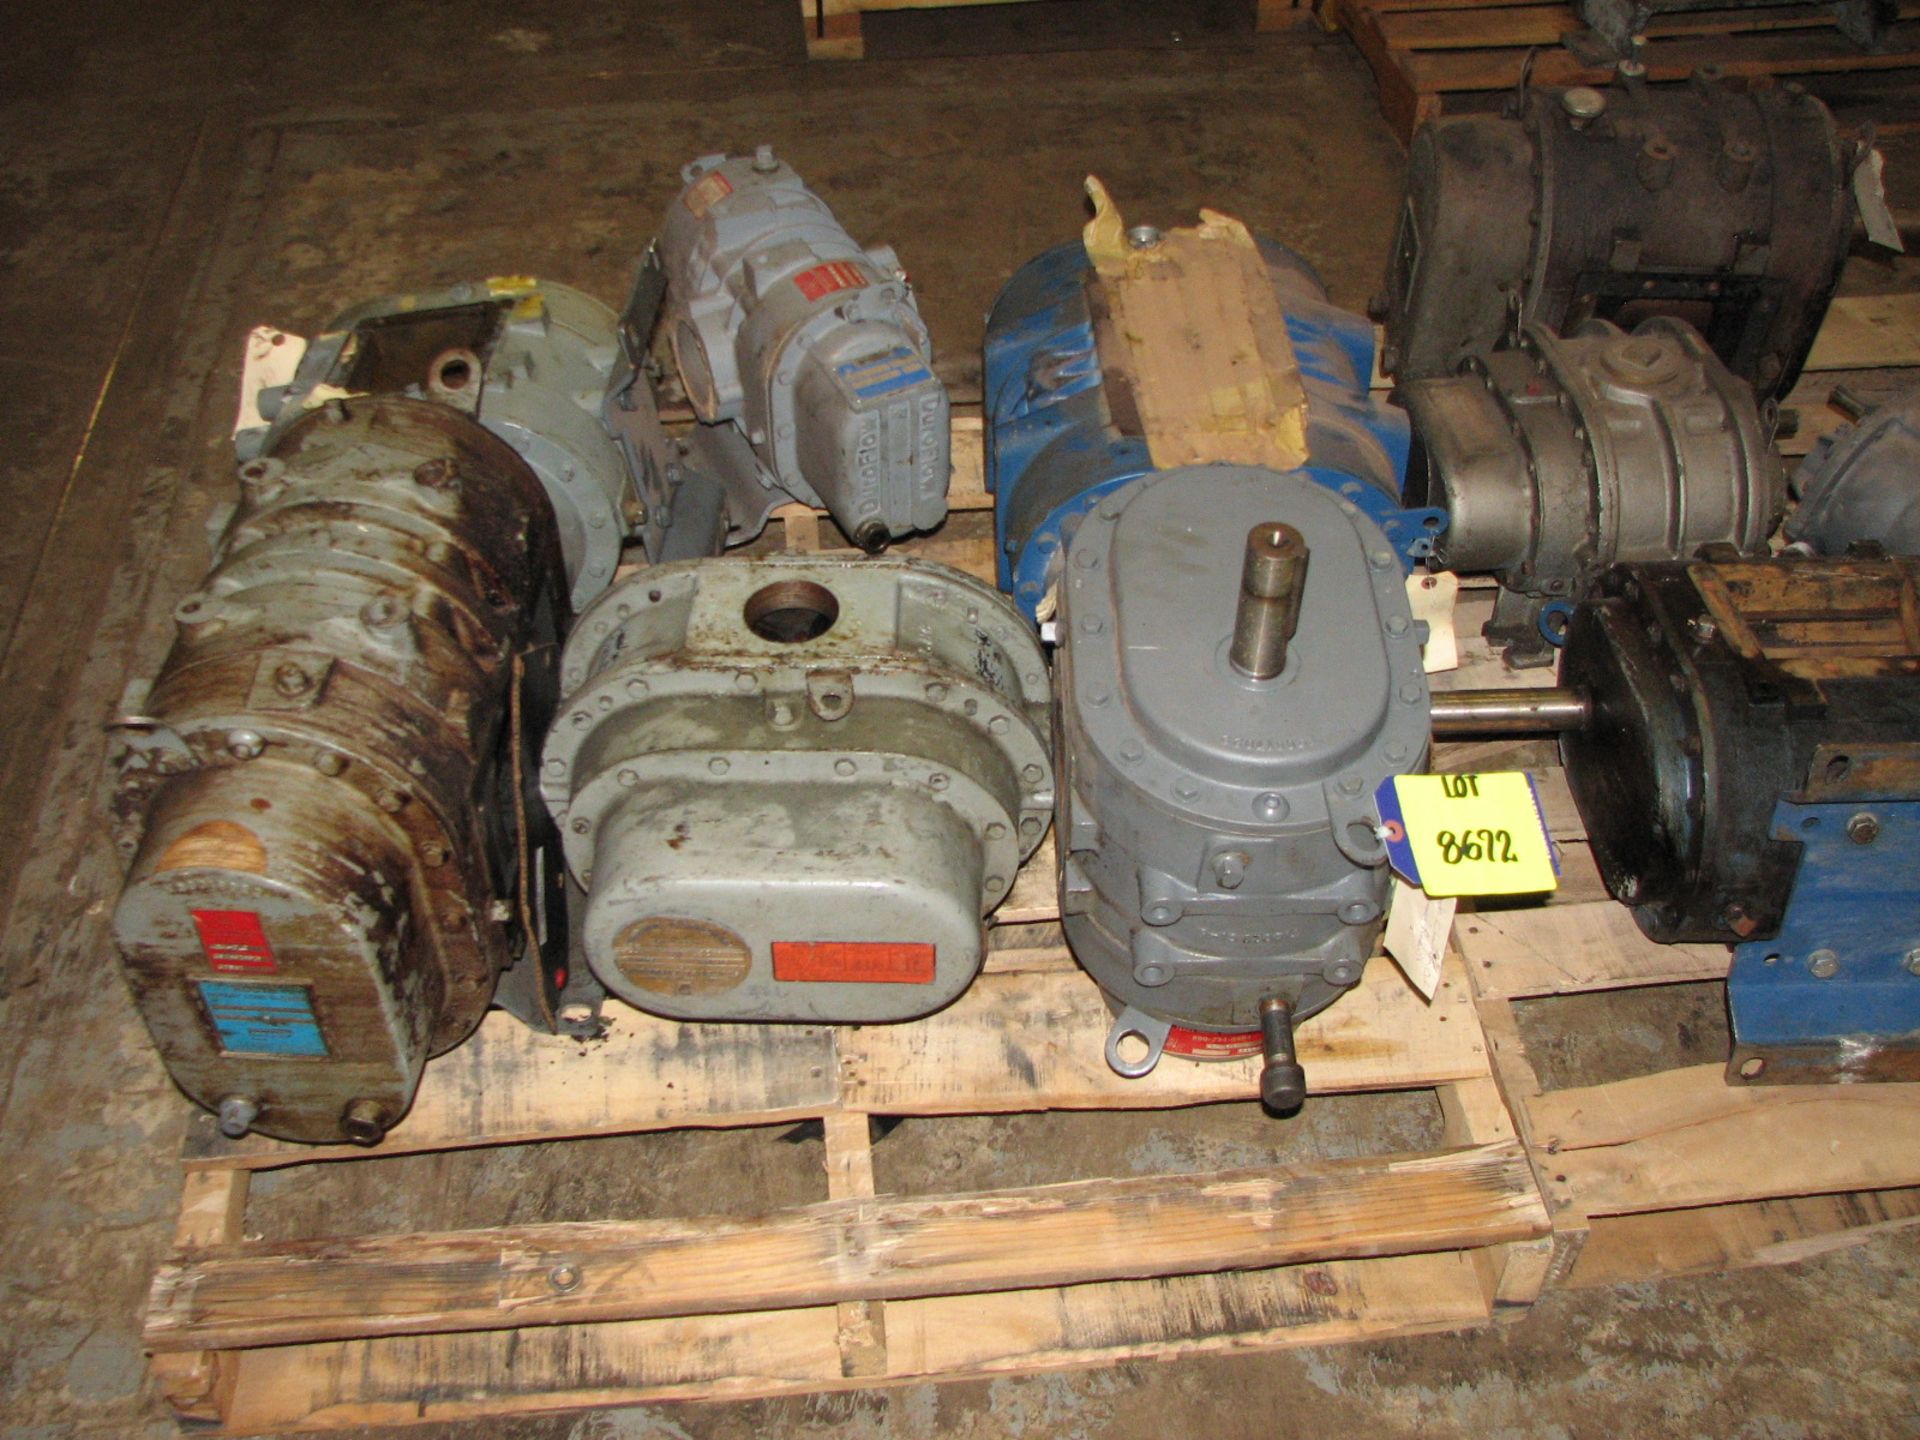 Lot of (12) assorted rotary blowers on (2) pallets [Franklin]